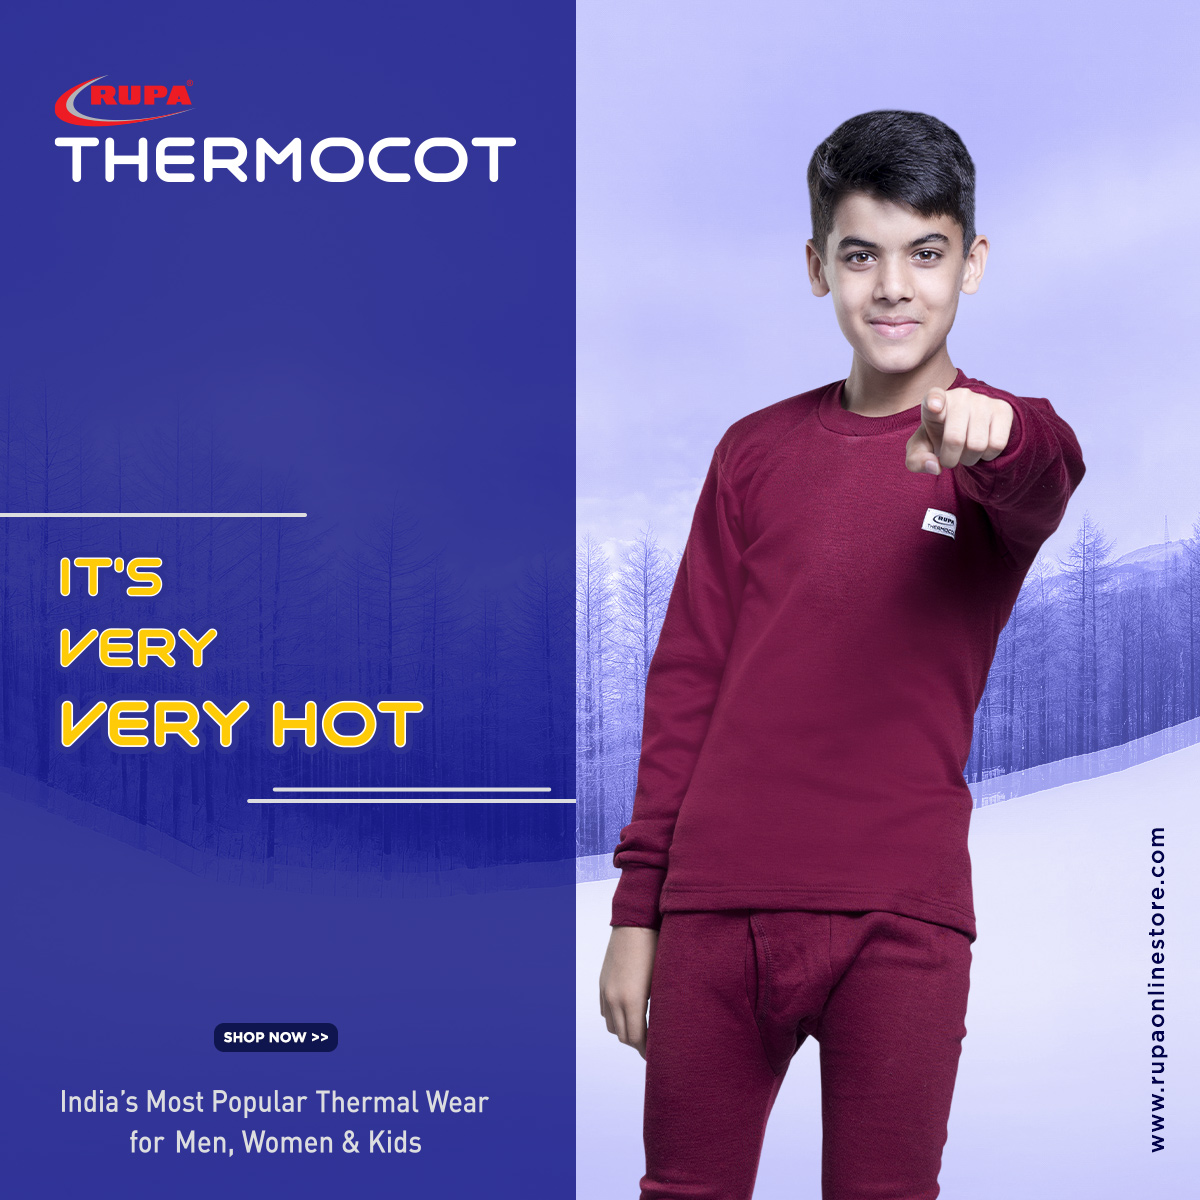 Rupa Knitwear on X: Shop Rupa Thermocot - India's Most Popular